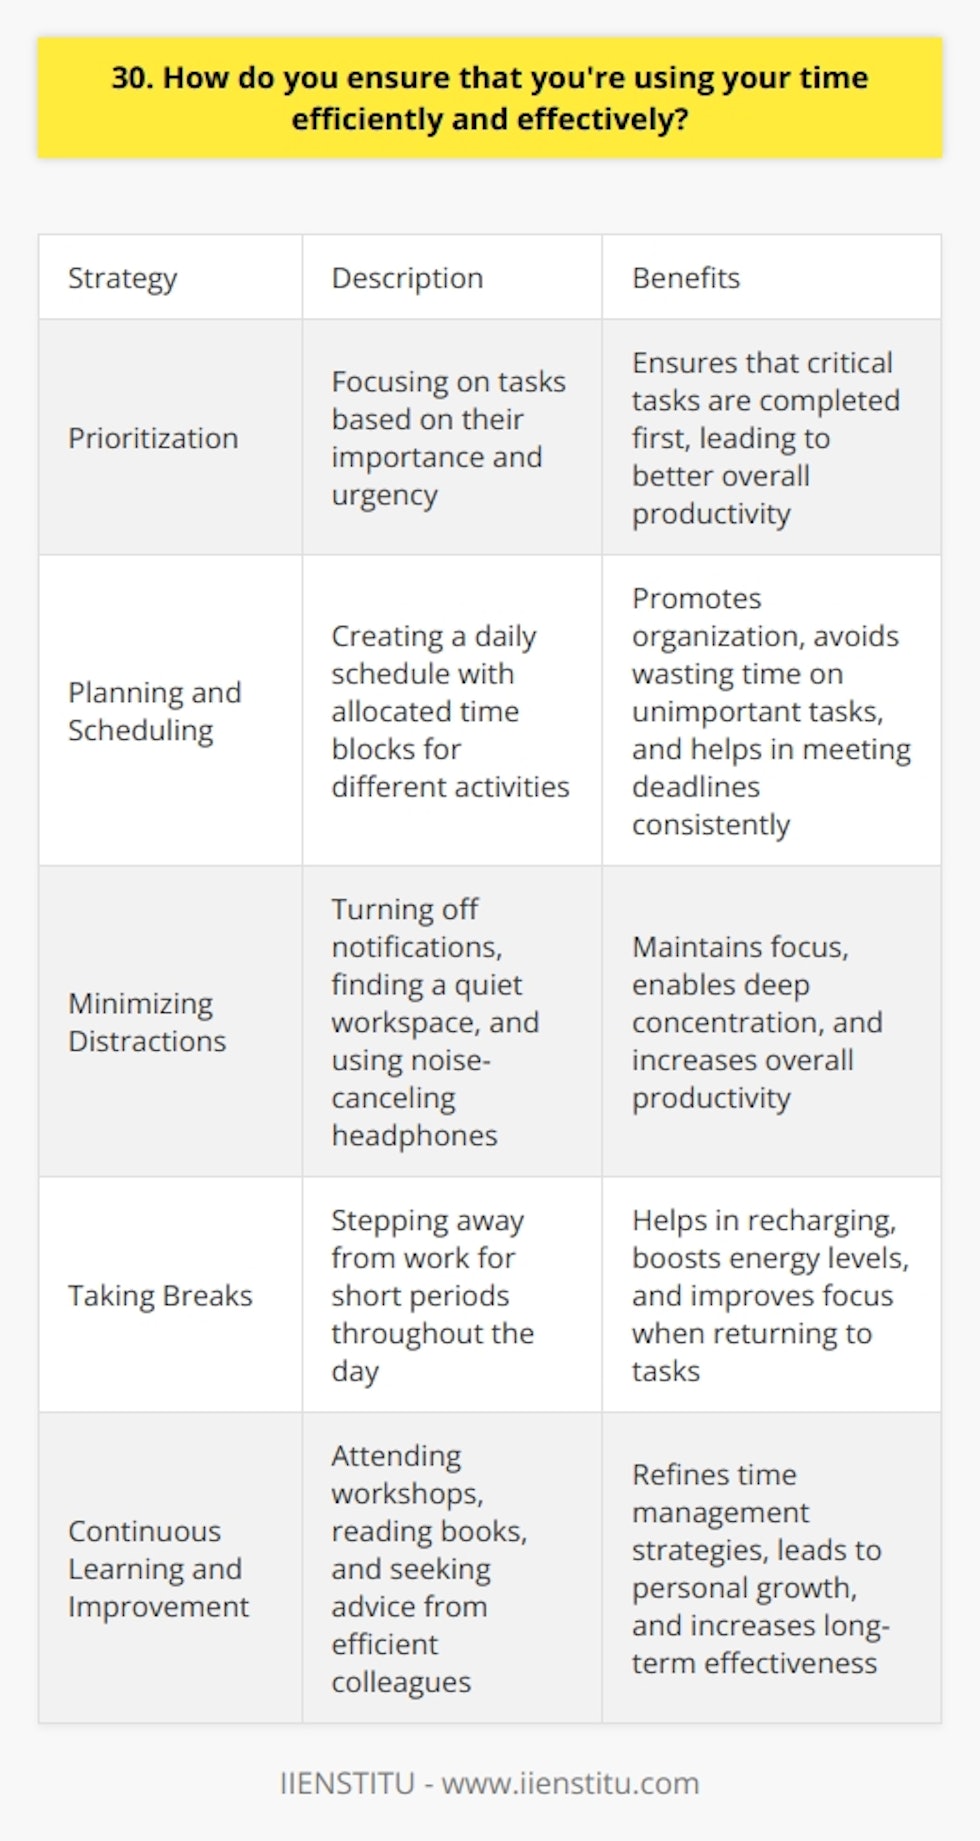 I ensure that Im using my time efficiently and effectively through a combination of strategies. First and foremost, I prioritize my tasks based on their importance and urgency. This helps me focus on the most critical tasks first. Planning and Scheduling I create a daily schedule that allocates specific time blocks for different activities. This helps me stay organized and avoid wasting time on unimportant tasks. I also set realistic deadlines for myself and strive to meet them consistently. Minimizing Distractions To maintain focus, I minimize distractions by turning off notifications on my devices and finding a quiet workspace. When I need to concentrate deeply, I put on noise-canceling headphones and listen to instrumental music. Taking Breaks Ive learned that taking short breaks throughout the day actually boosts my productivity. Stepping away from my desk for a few minutes helps me recharge and return to my tasks with renewed energy and focus. Continuous Learning and Improvement Im always looking for ways to improve my time management skills. I attend workshops, read books, and seek advice from colleagues who are particularly efficient. By continuously learning and adapting, Im able to refine my strategies and become more effective over time. In my experience, the key to using time efficiently and effectively is finding a system that works for you personally. Its taken me some trial and error, but Ive developed a routine that helps me stay on track and achieve my goals consistently.